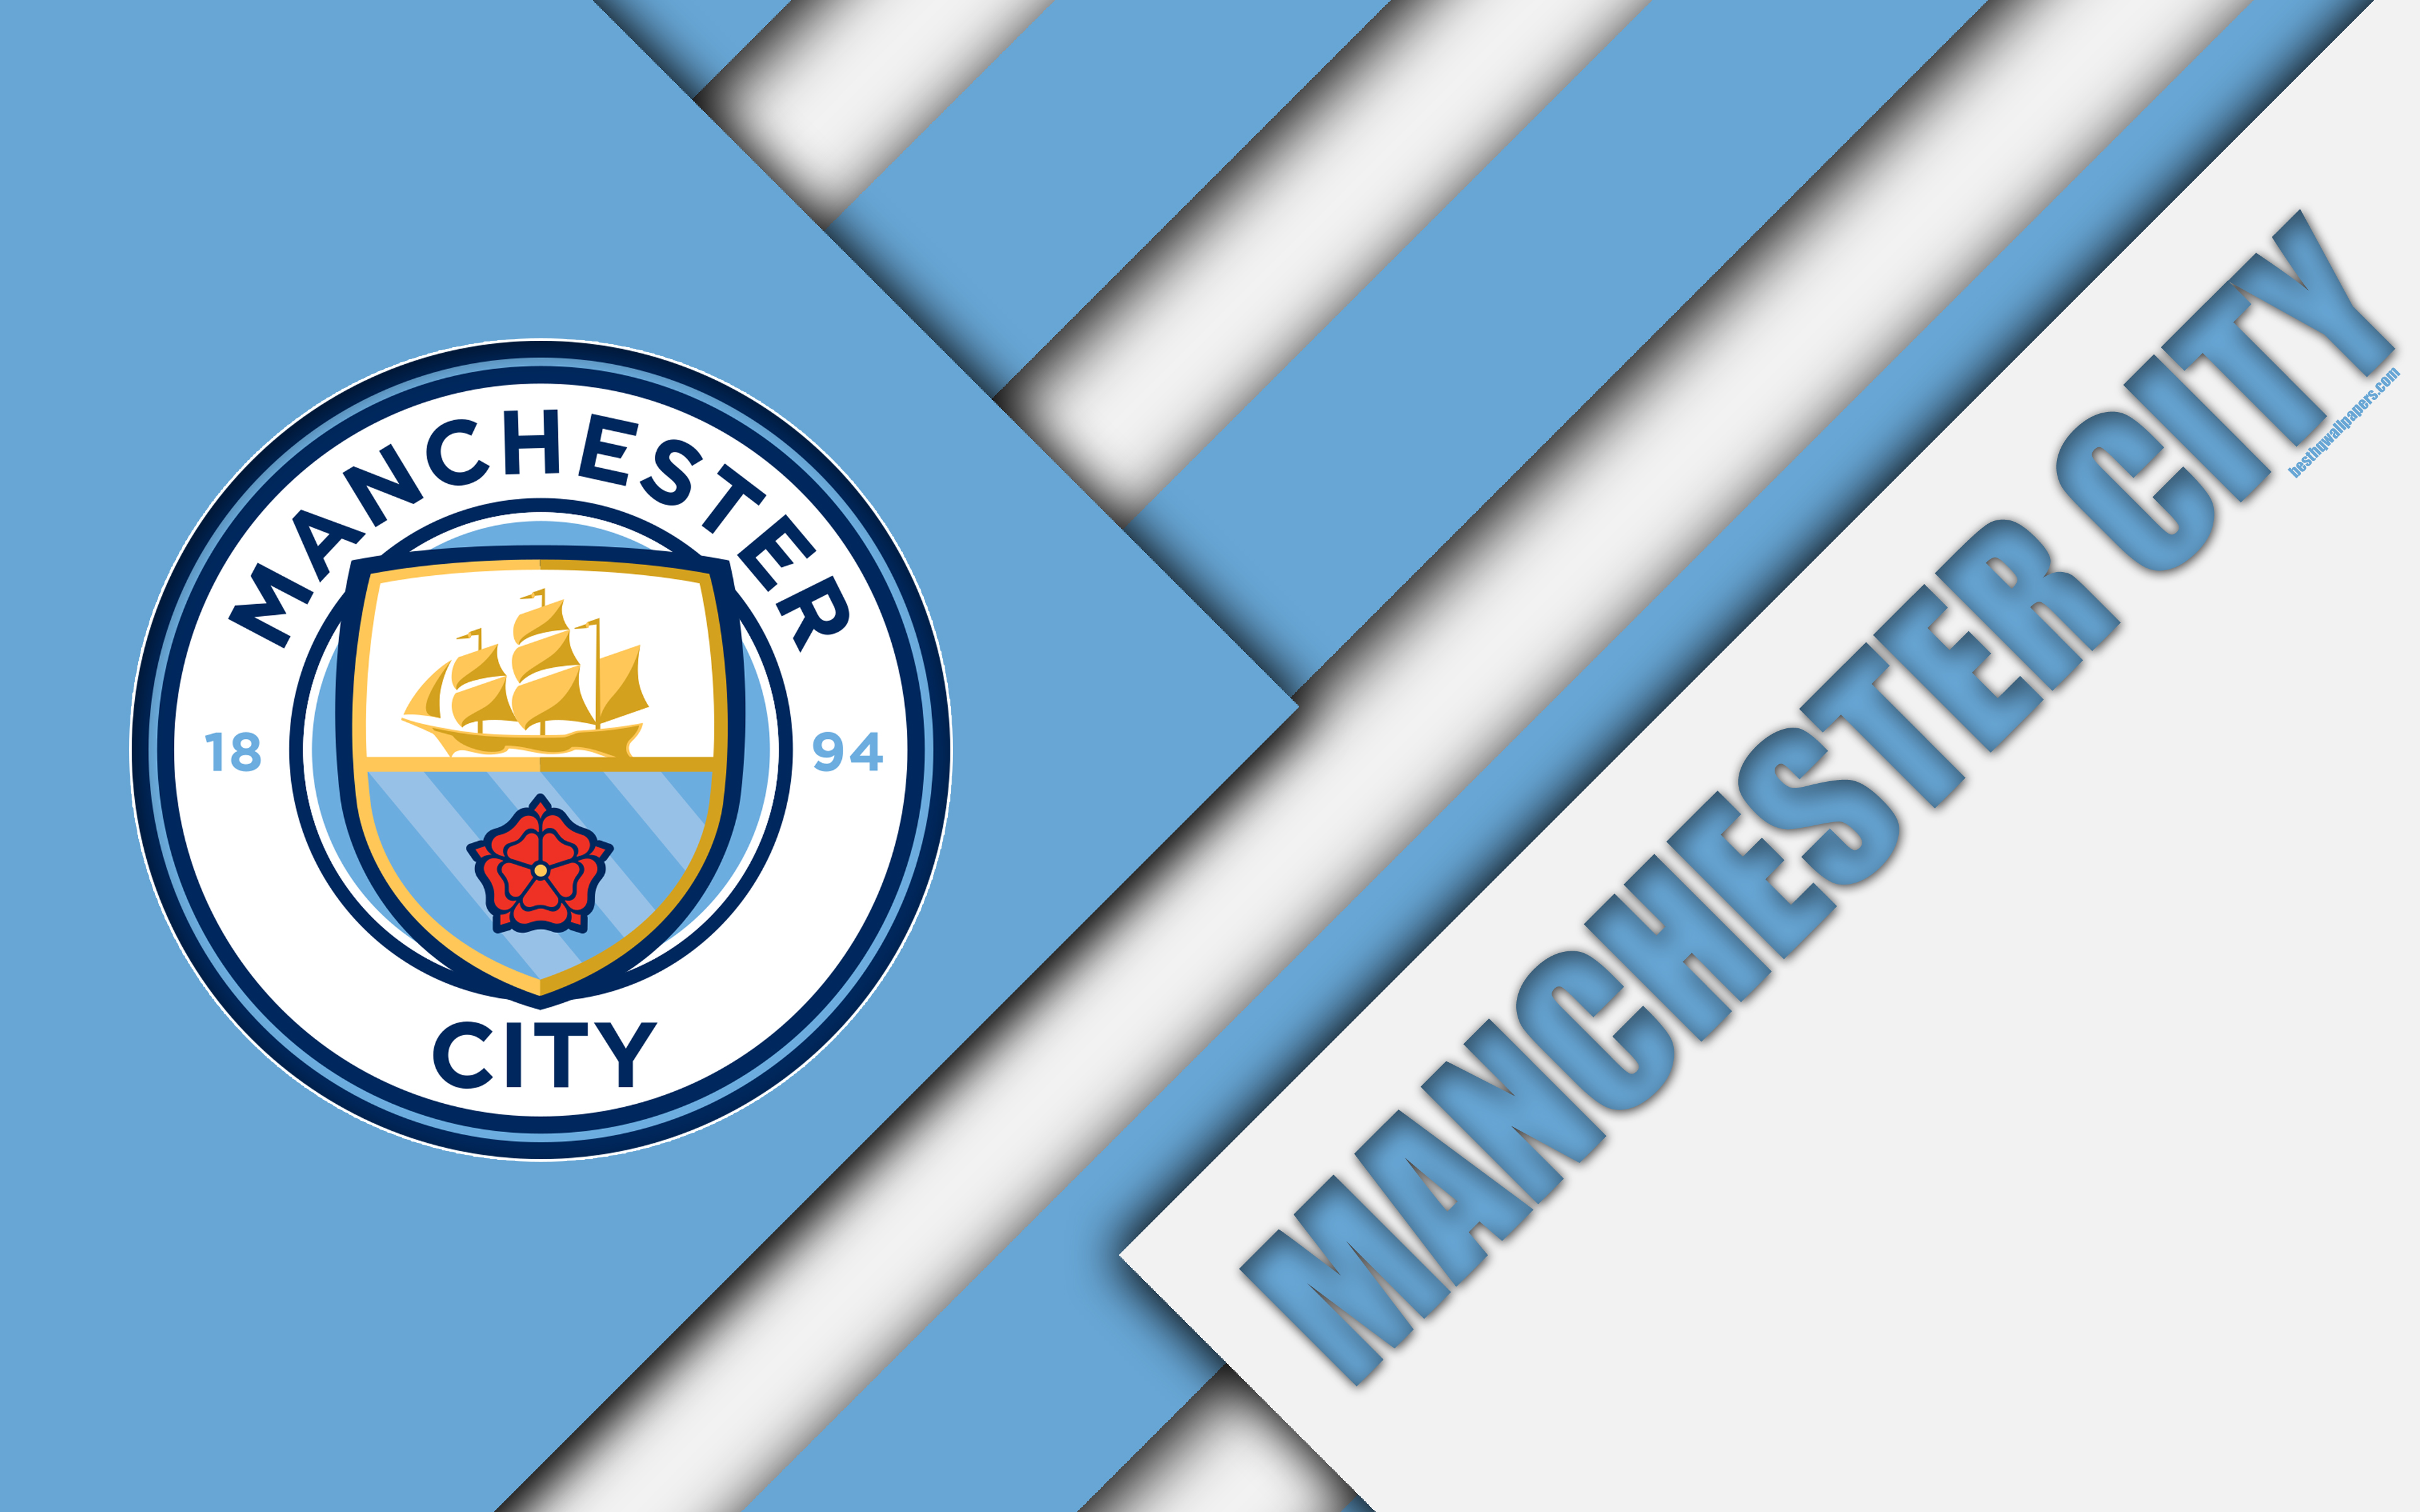 Download wallpaper Manchester City FC, logo, 4k, material design, blue white abstraction, football, Gorton, Manchester, England, UK, Premier League, English football club for desktop with resolution 3840x2400. High Quality HD picture wallpaper